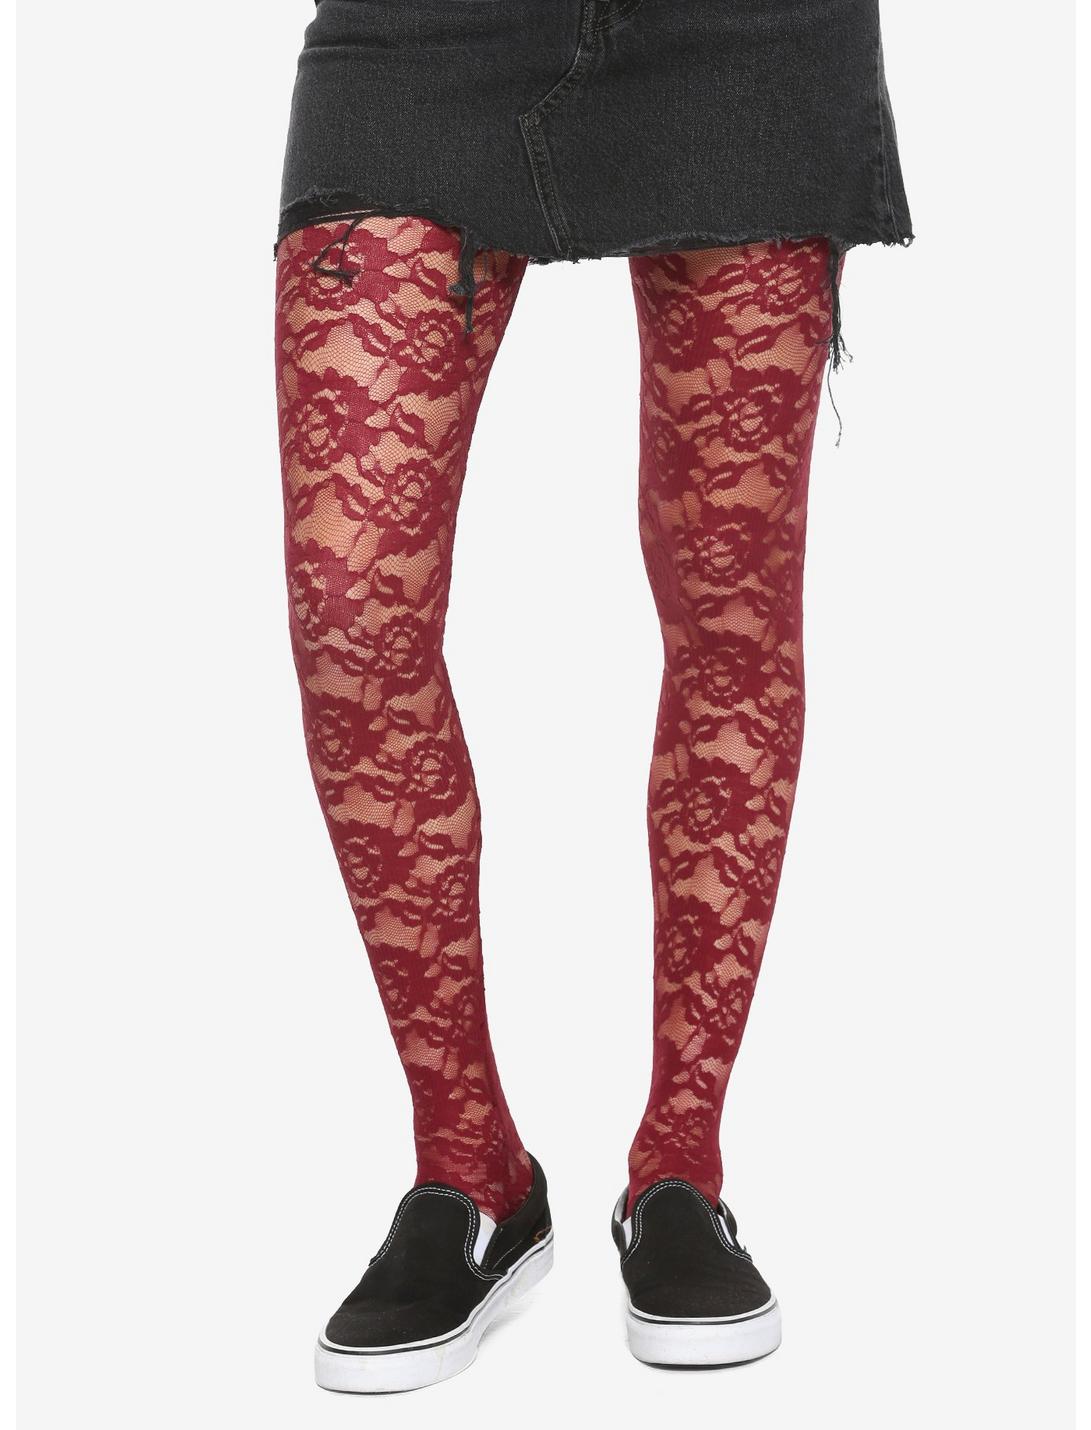 Maroon Lace Roses Tights, MULTI, hi-res